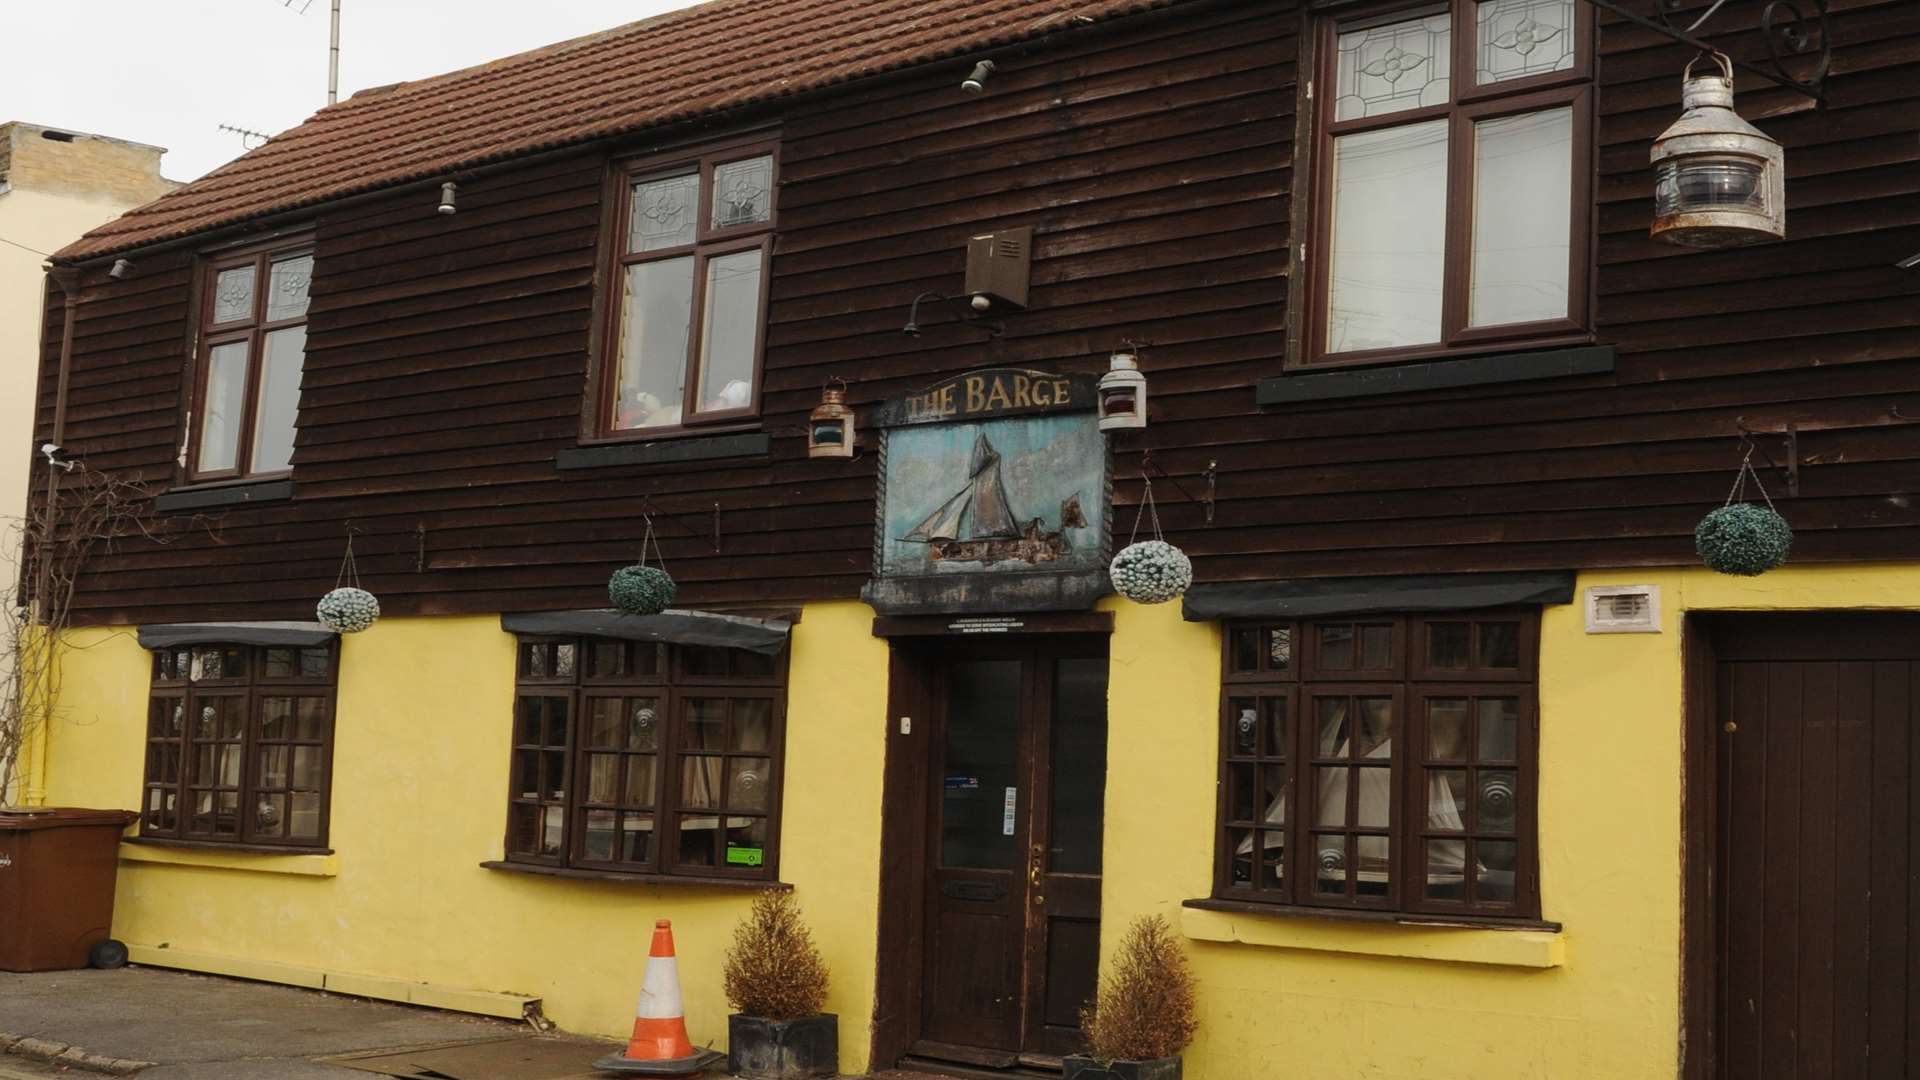 The Barge, Layfield Road, Gillingham